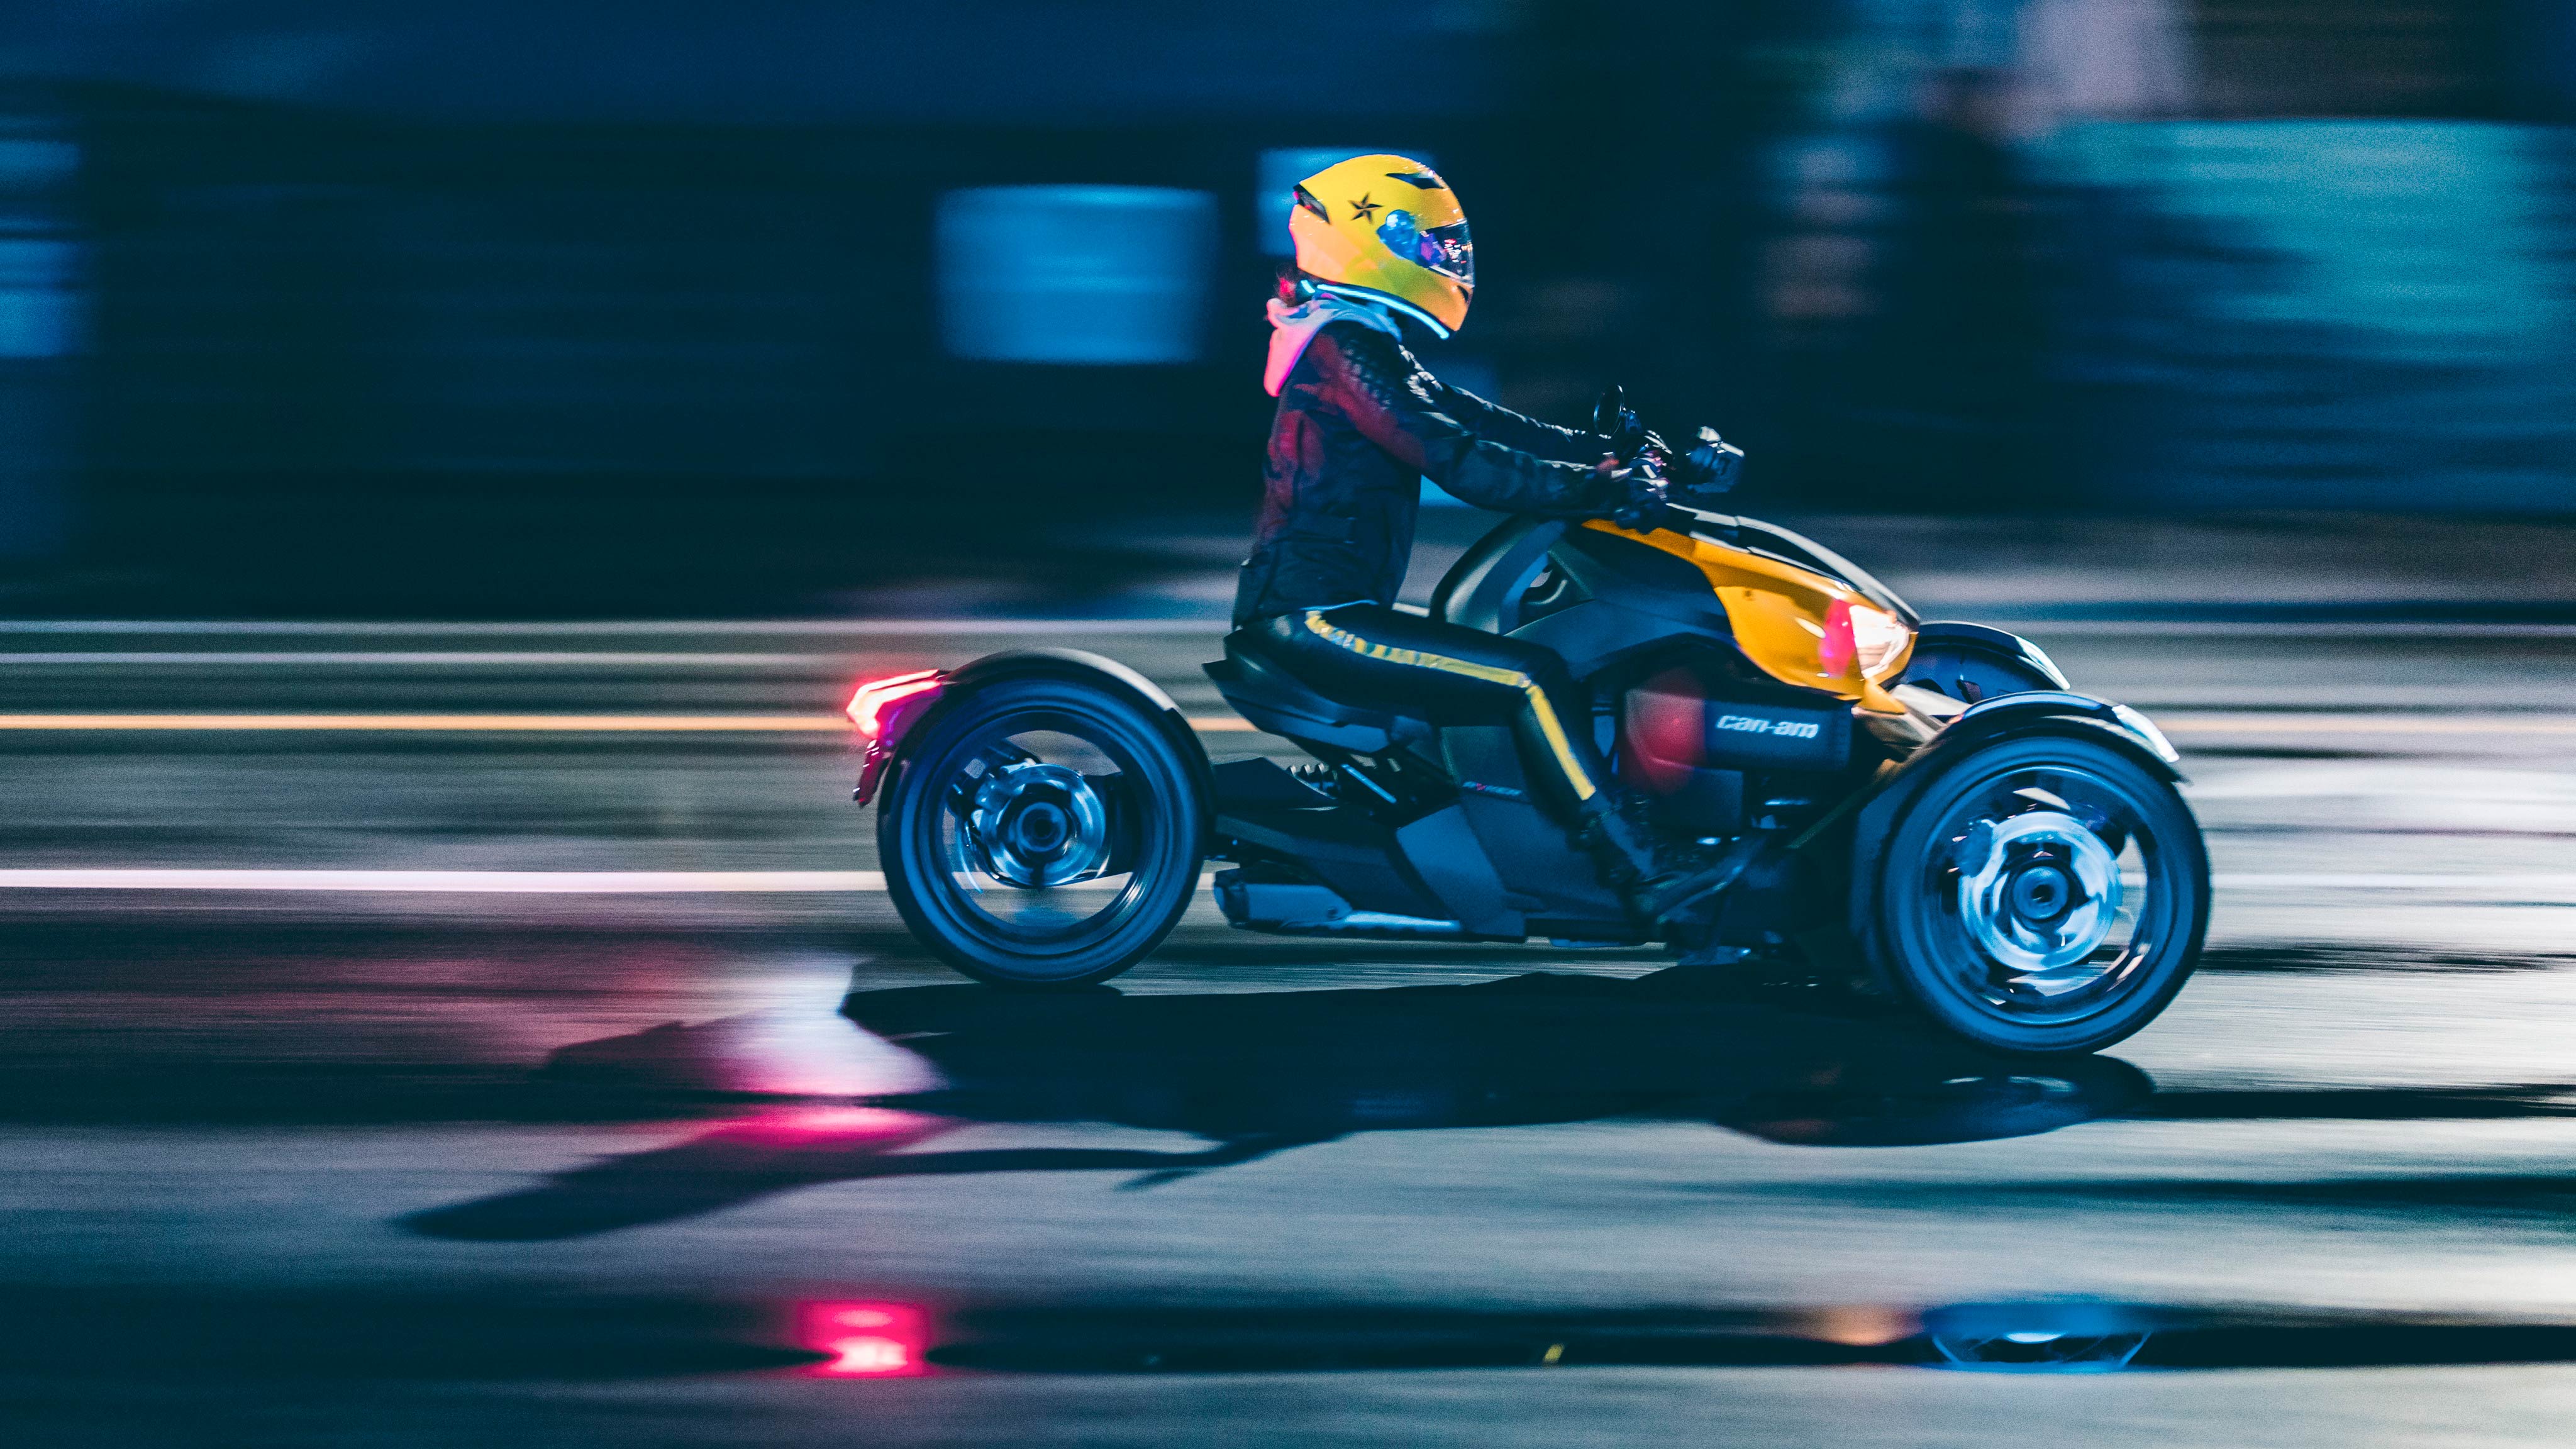 Woman riding Can-Am Ryker vehicle with yellow helmet